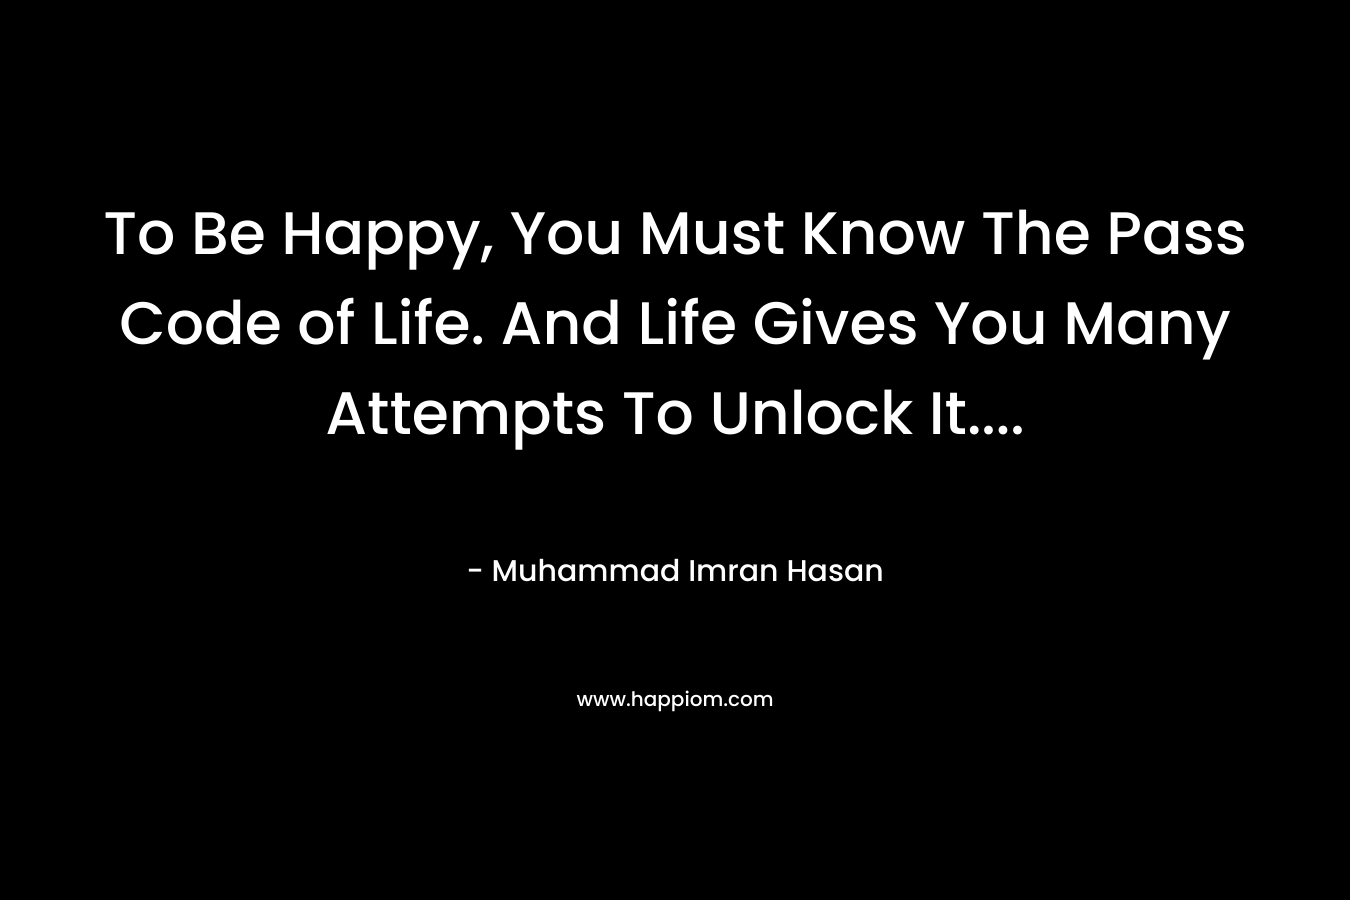 To Be Happy, You Must Know The Pass Code of Life. And Life Gives You Many Attempts To Unlock It....